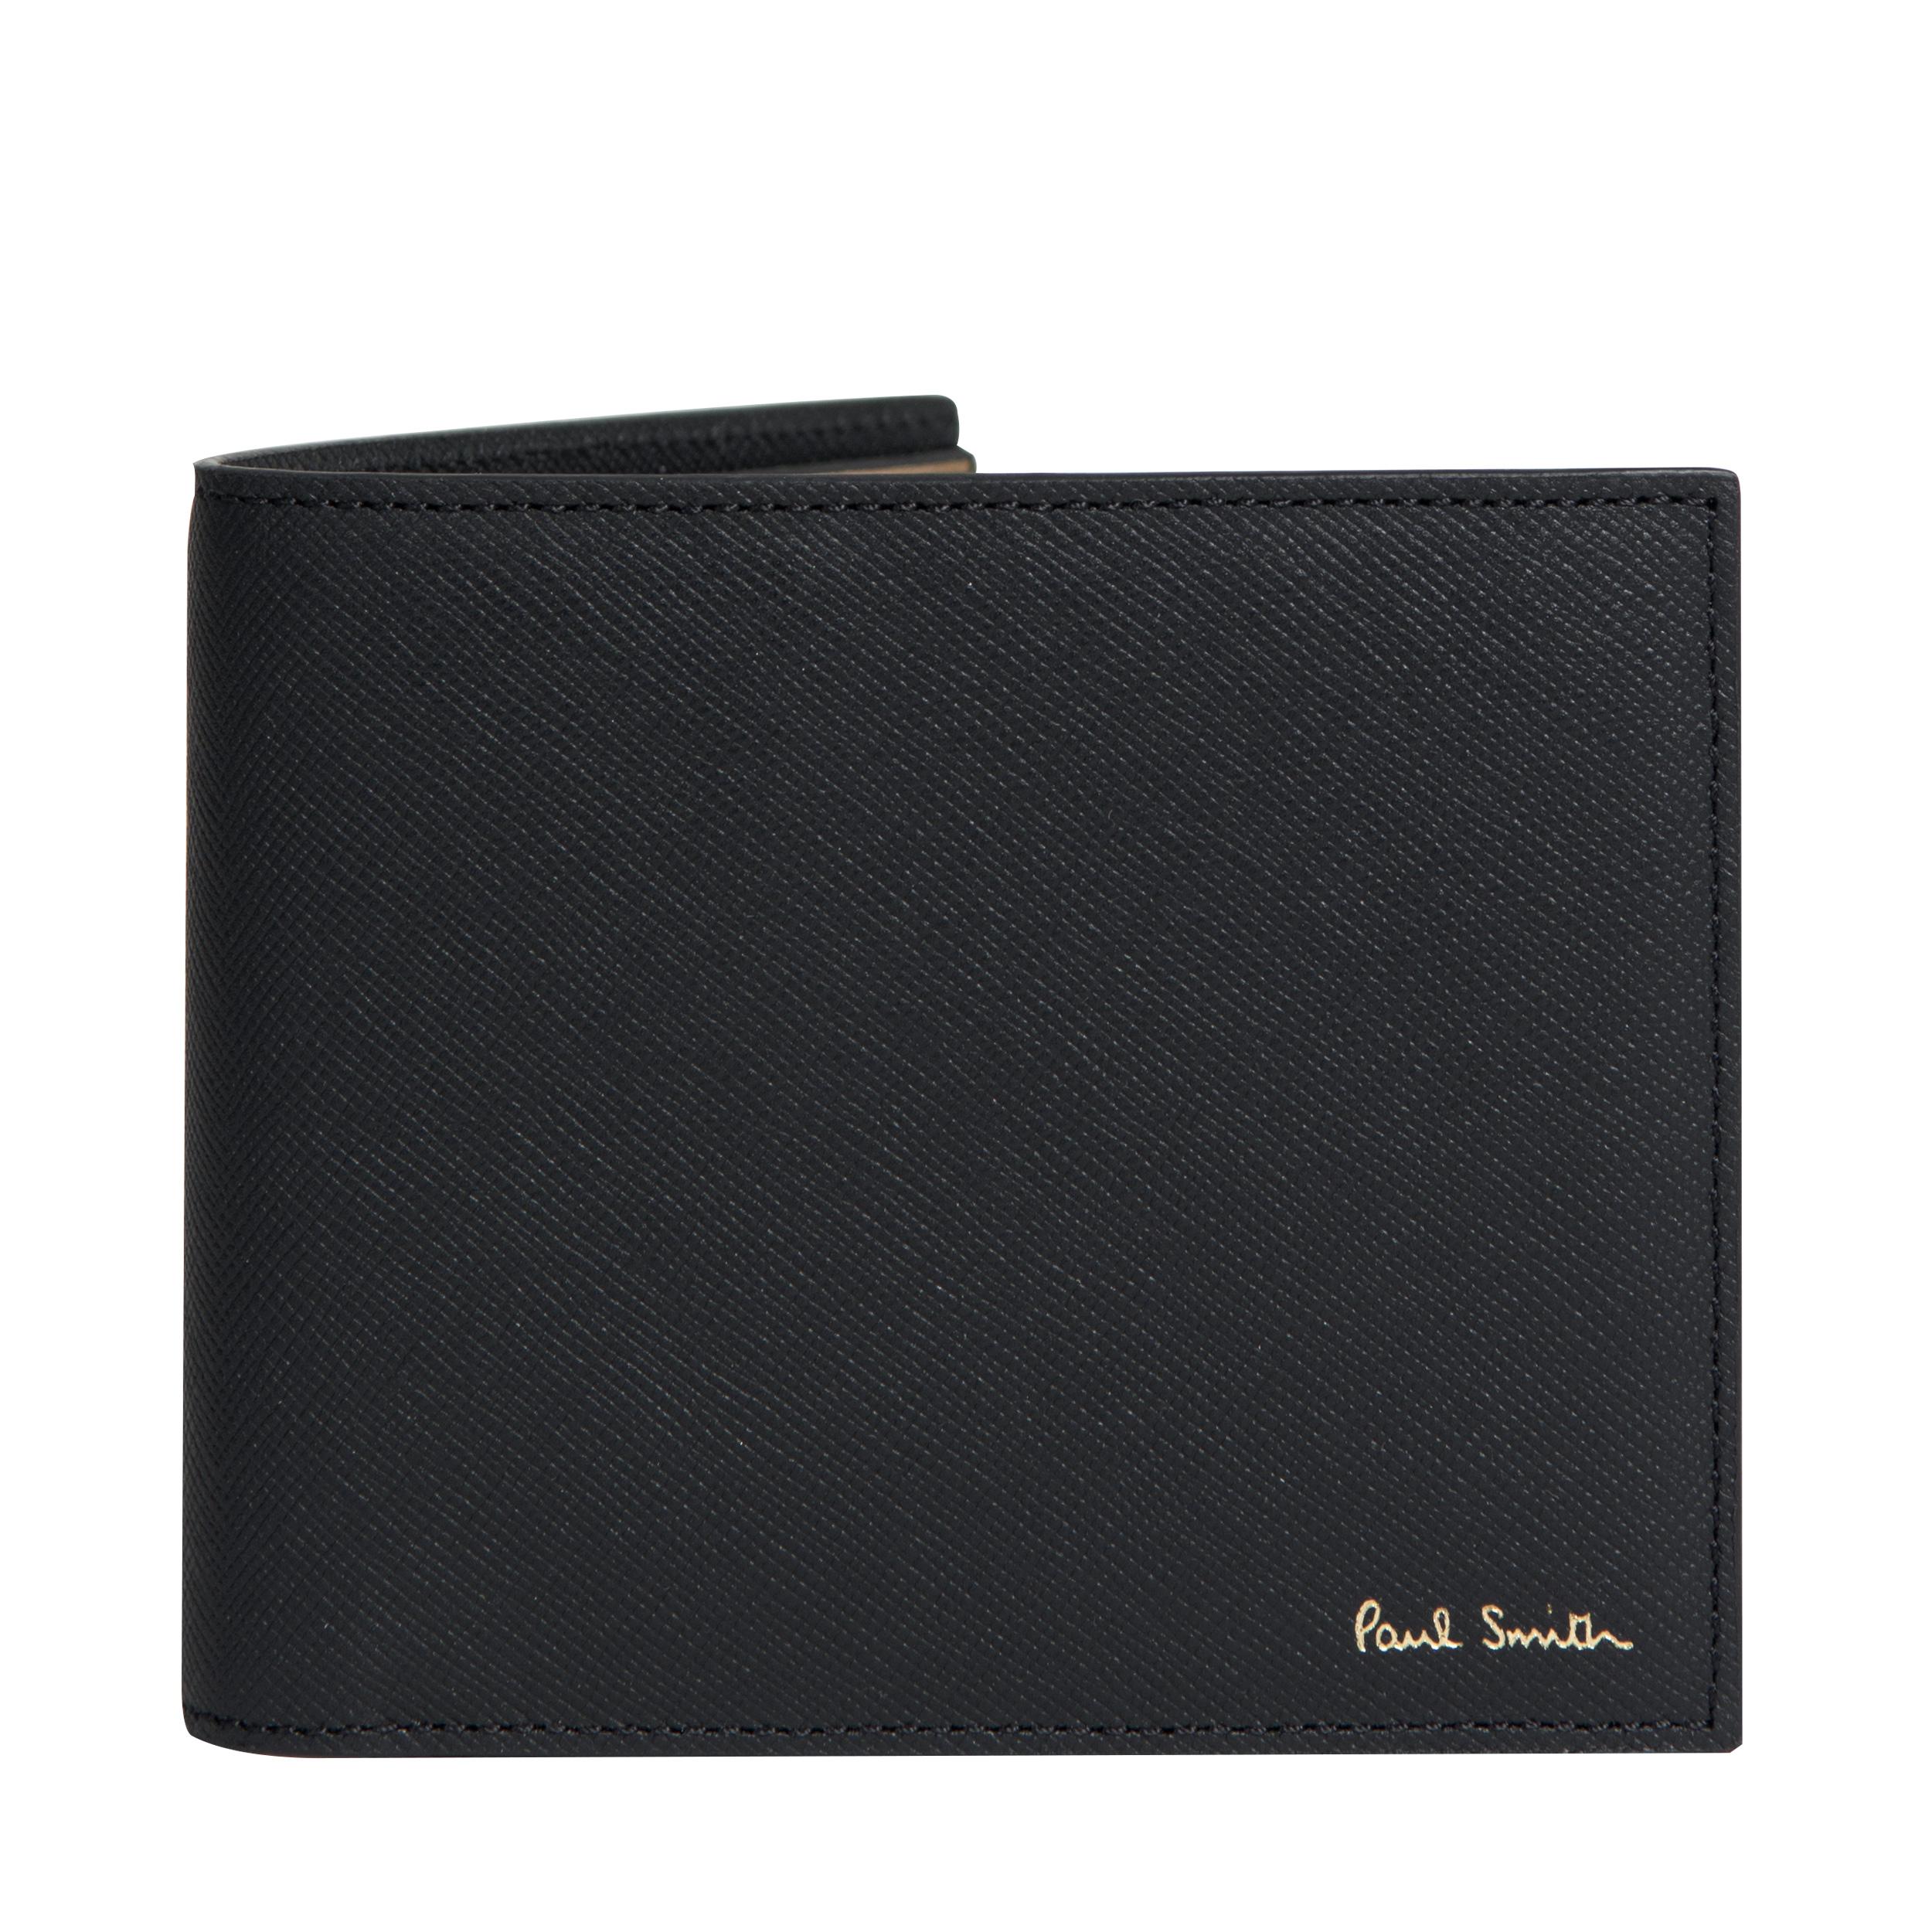 Paul Smith Leather Racing Mini Print Interior Billfold Wallet Black for ...